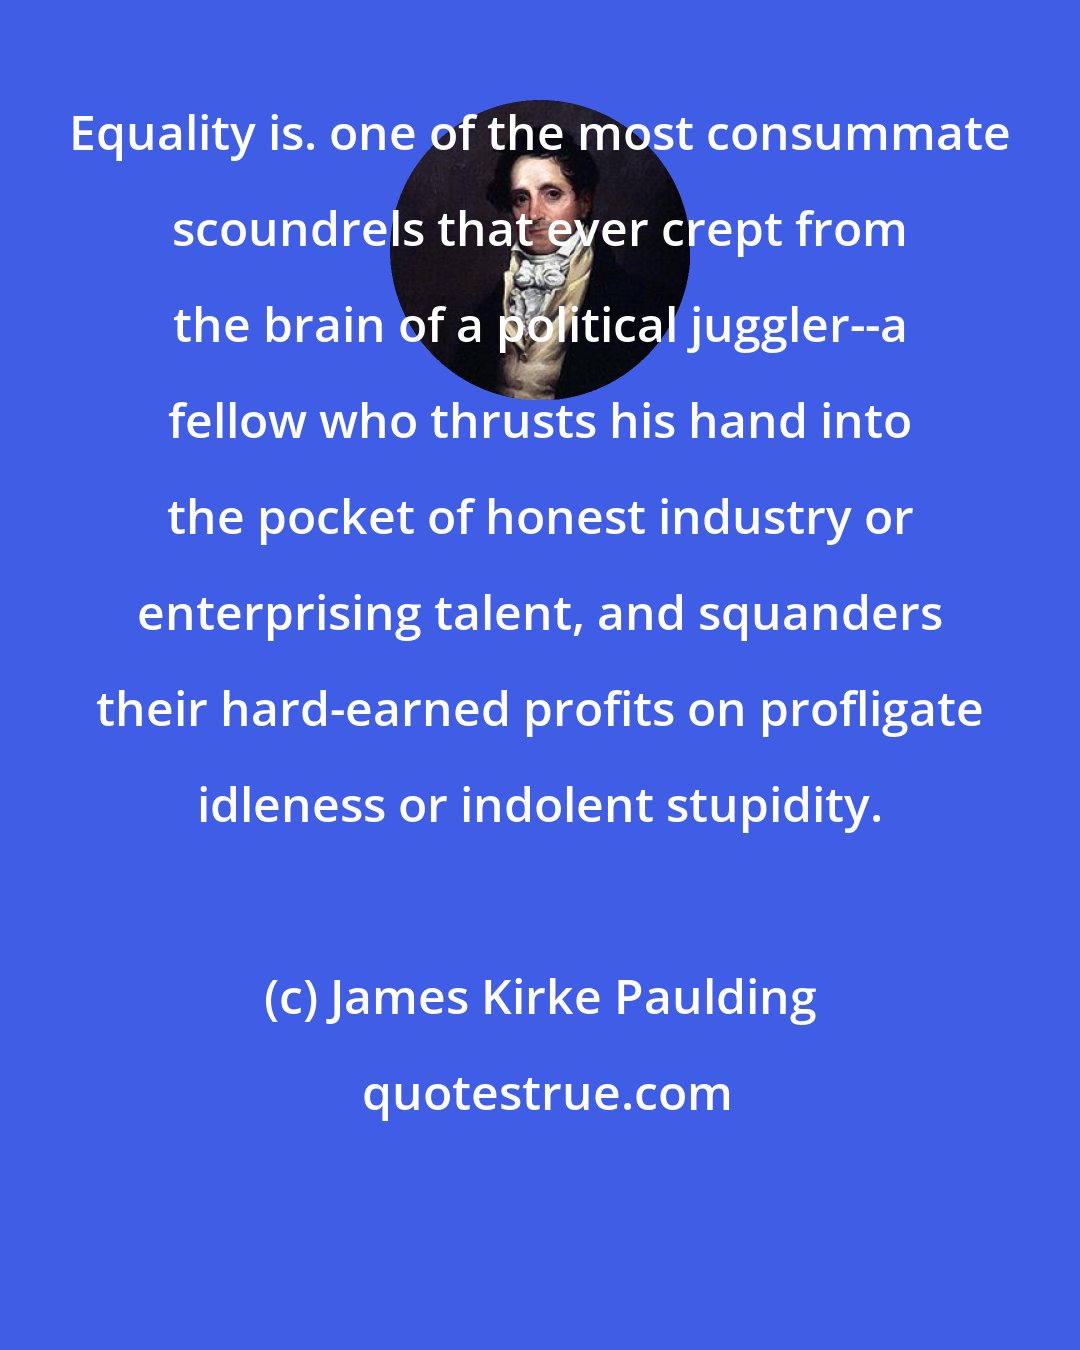 James Kirke Paulding: Equality is. one of the most consummate scoundrels that ever crept from the brain of a political juggler--a fellow who thrusts his hand into the pocket of honest industry or enterprising talent, and squanders their hard-earned profits on profligate idleness or indolent stupidity.